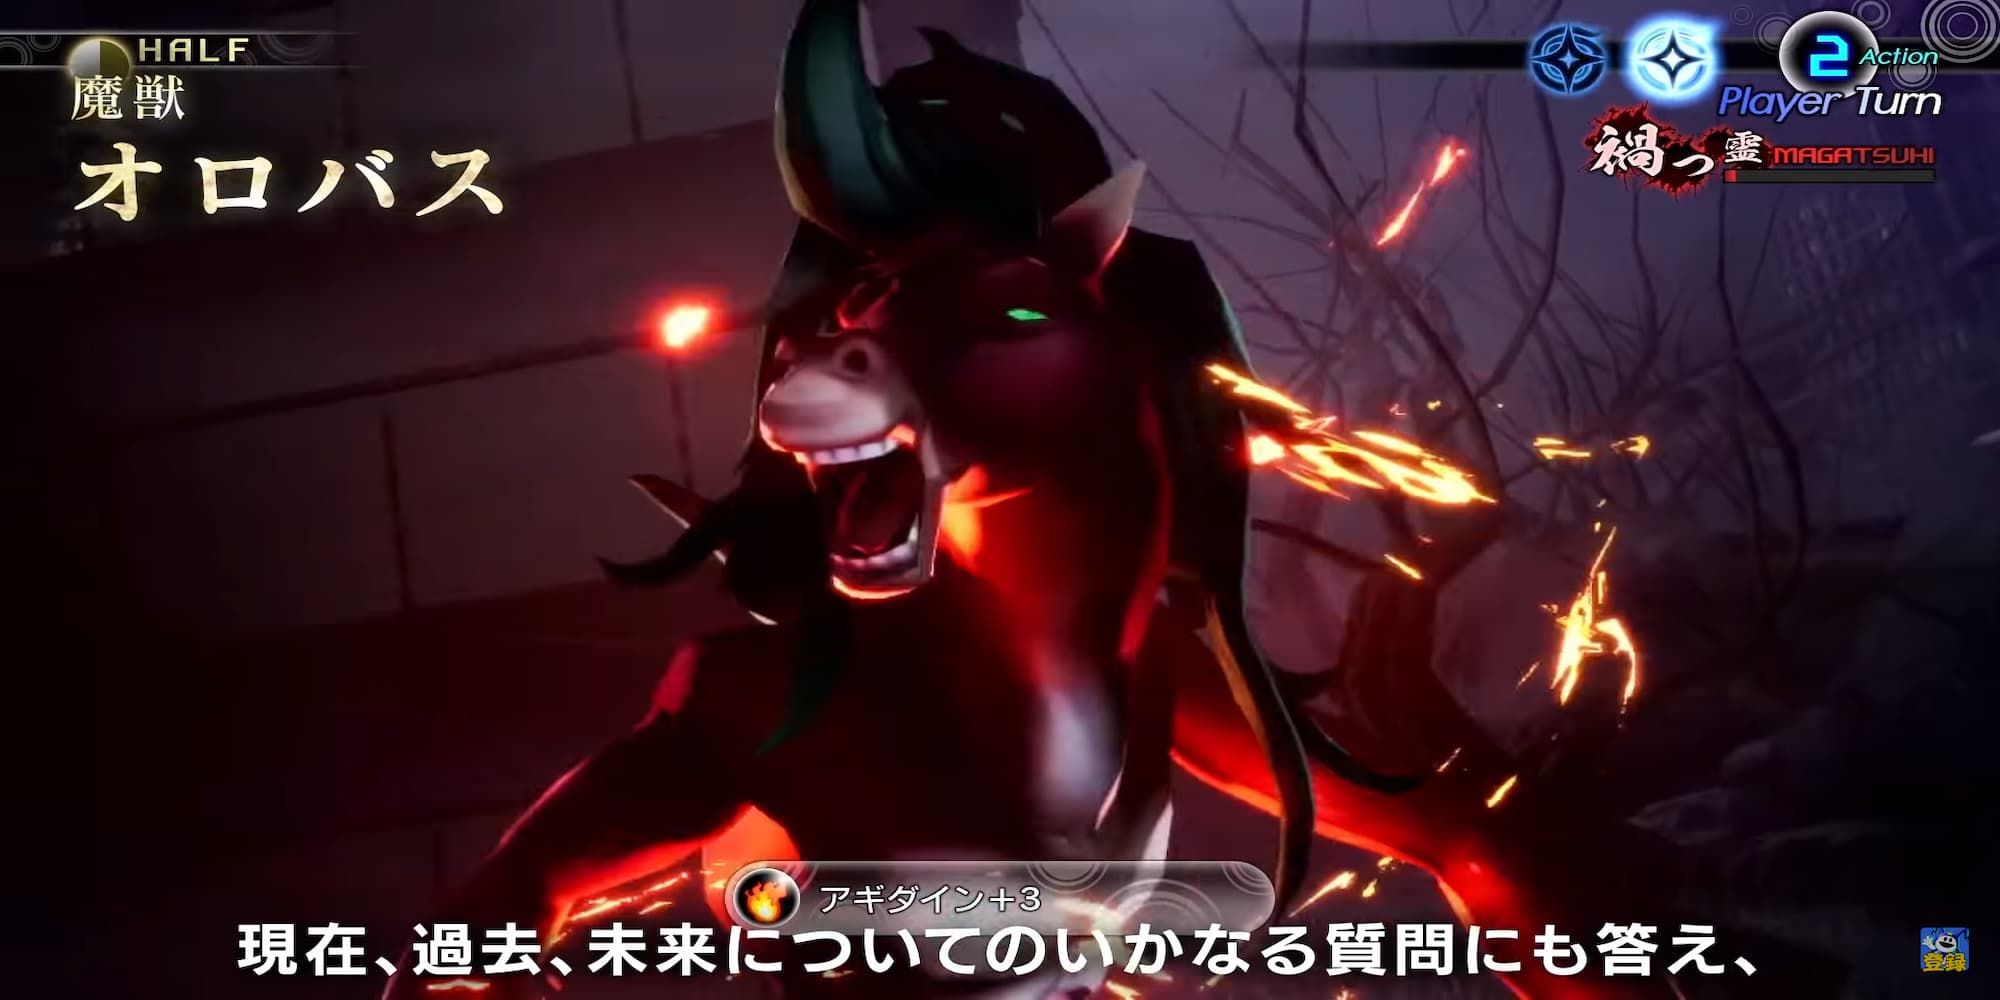 Shin Megami Tensei 5 Orobas closeup of red horse headed demon wisps of power around staring just off camera 